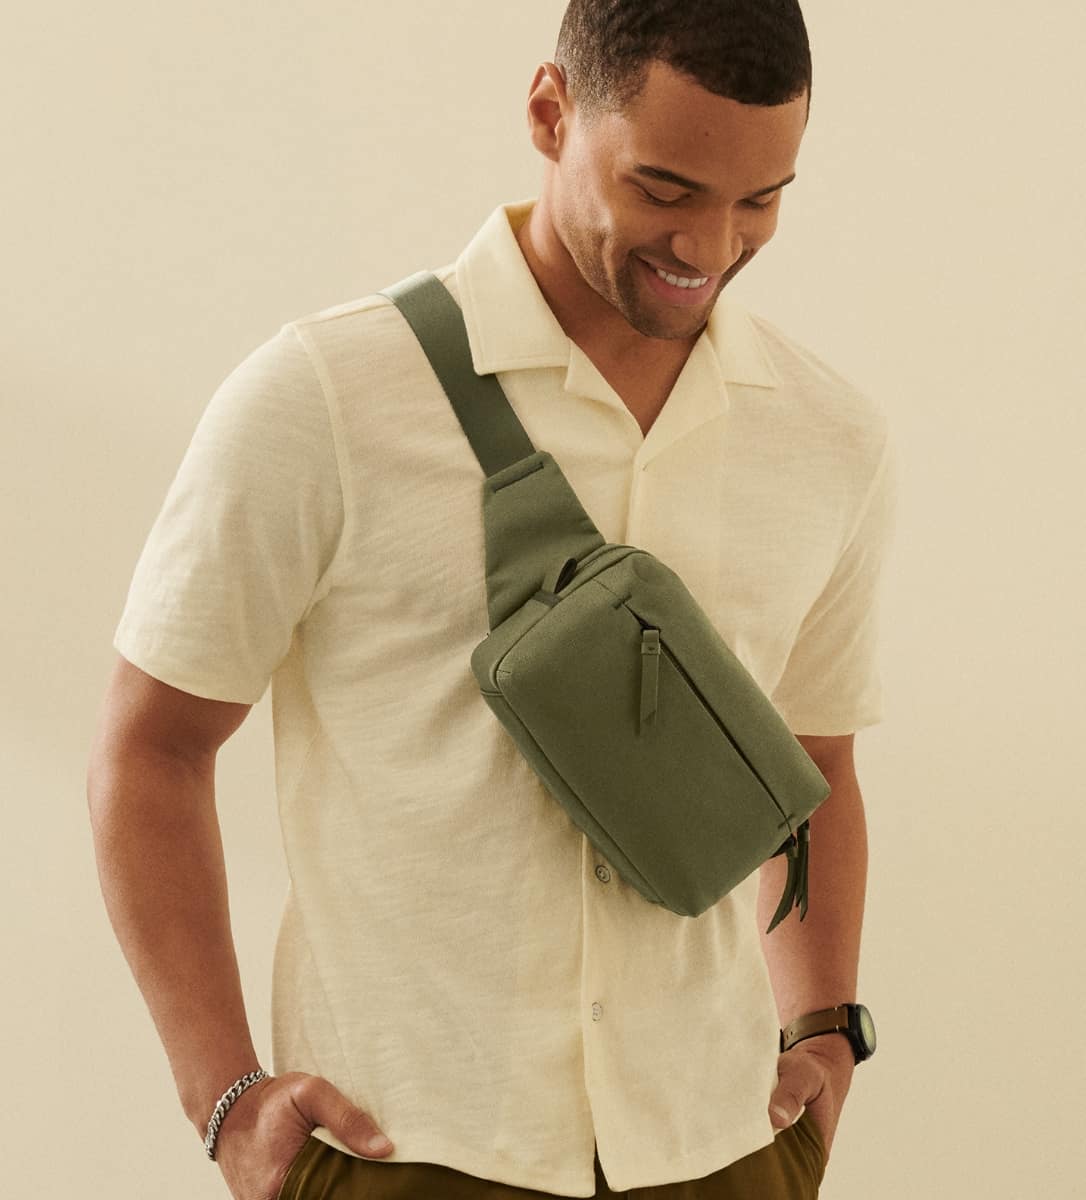 A man smiling and looking downward with his hands in his pockets. He’s wearing a light yellow polo shirt and olive green canvas belt bag worn diagonally across his chest.